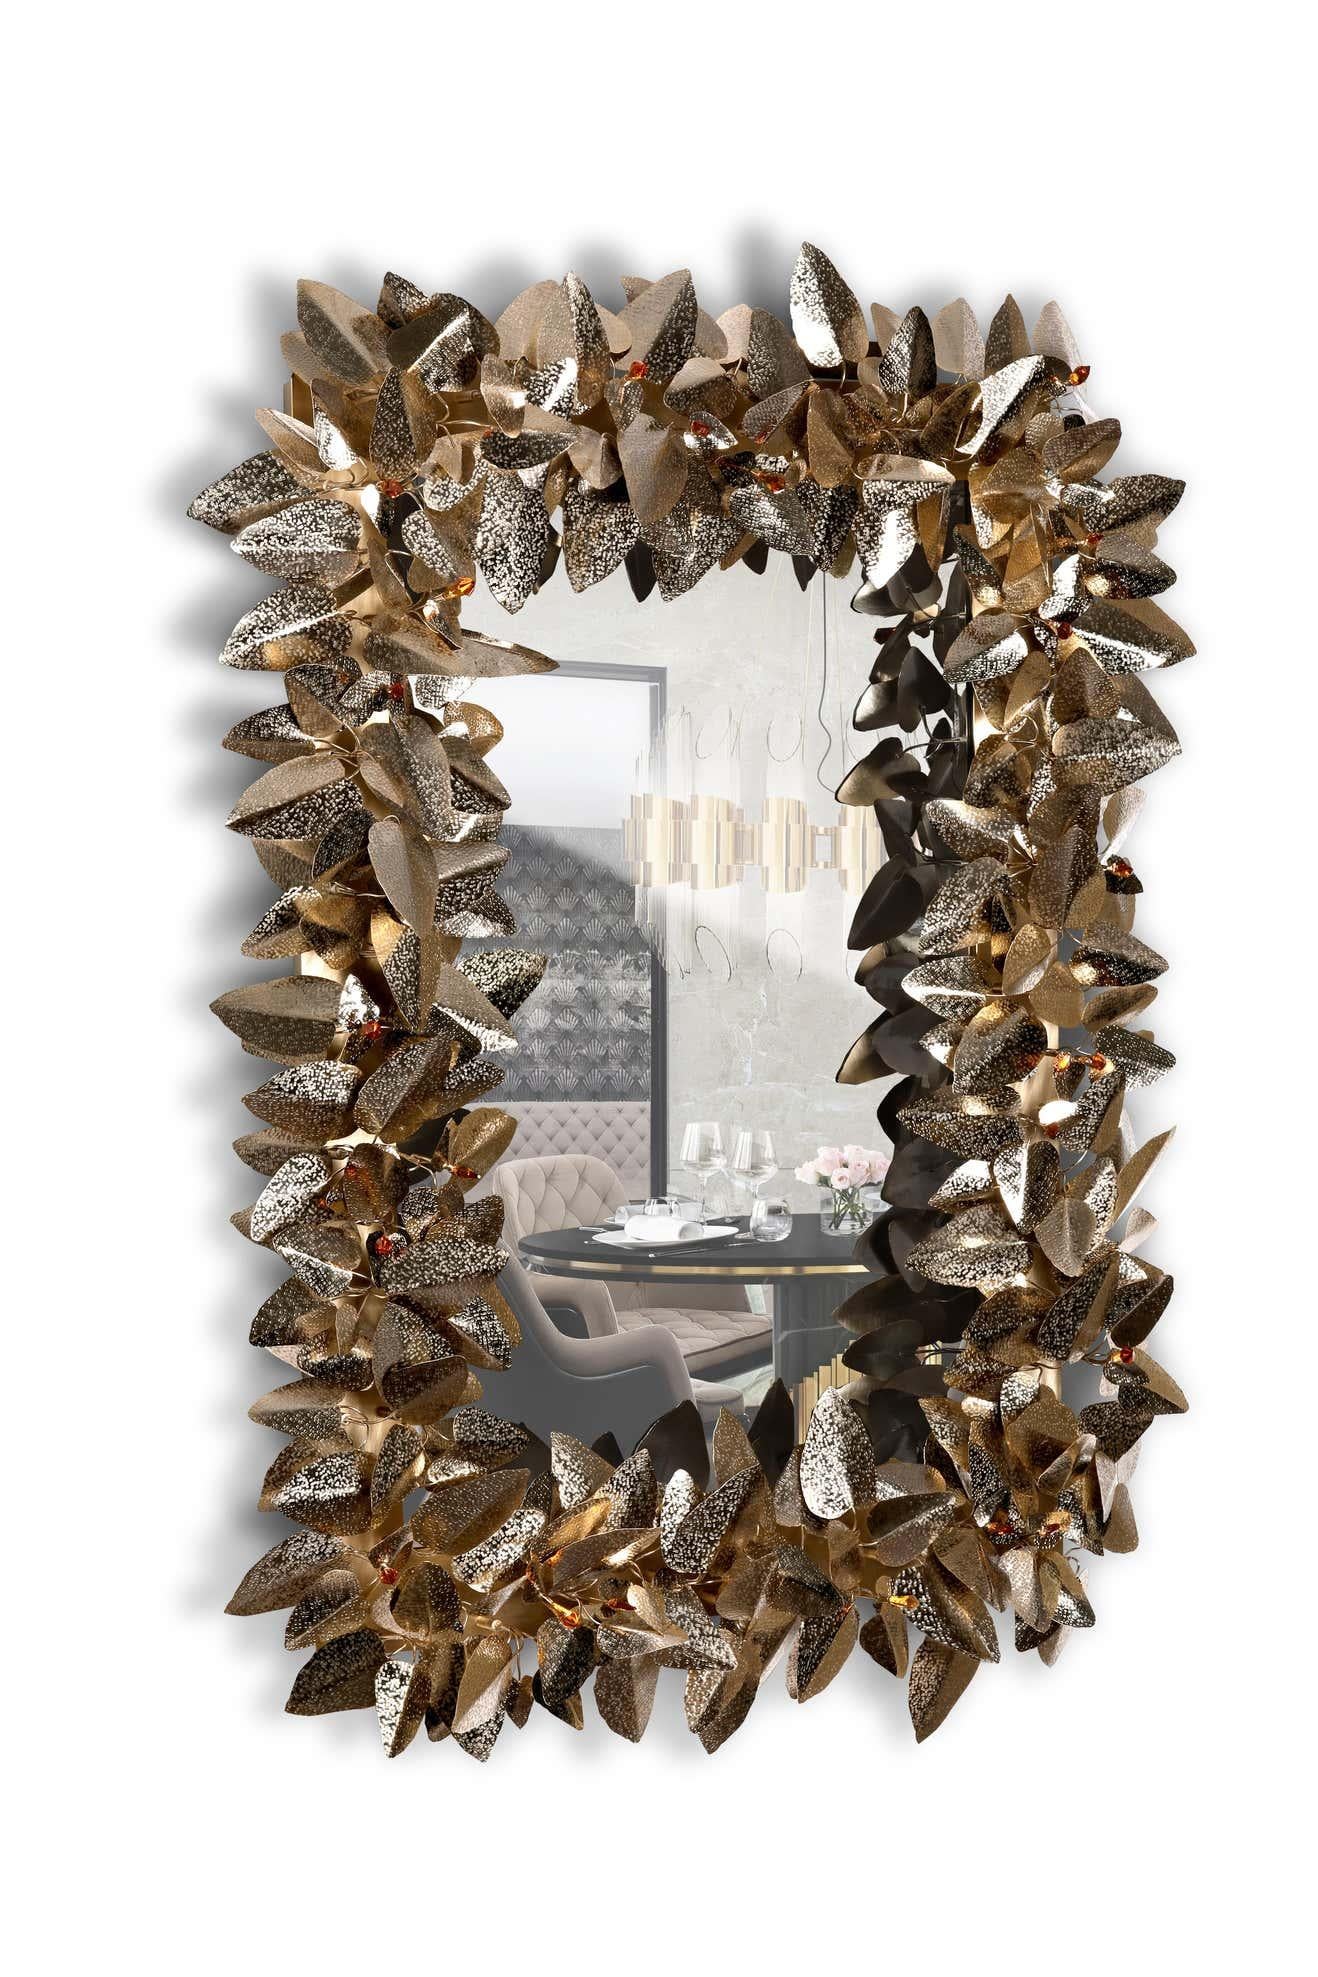 Mirror leaves
Body: Brass, Mirror & Swarovski Crystals
12x g9 Halogen Bulbs (40W max) *USA not included
Estimated Production Time: 13 - 14 weeks
Measures: Height: 106 cm
Width: 76 cm
Depth: 13 cm.